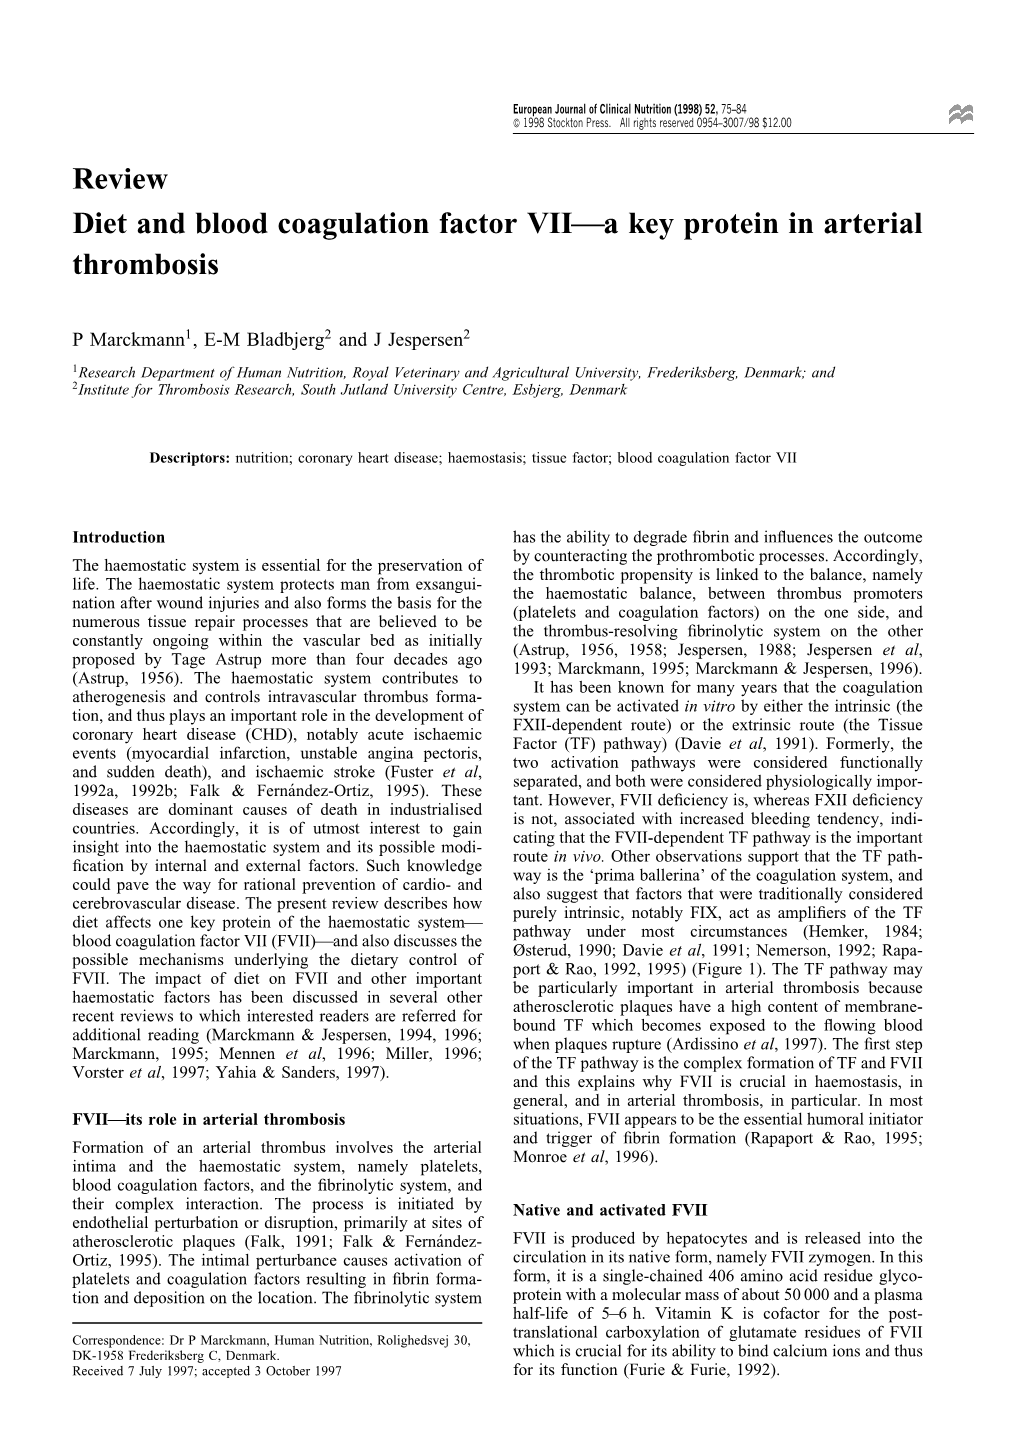 Review Diet and Blood Coagulation Factor VII–A Key Protein in Arterial